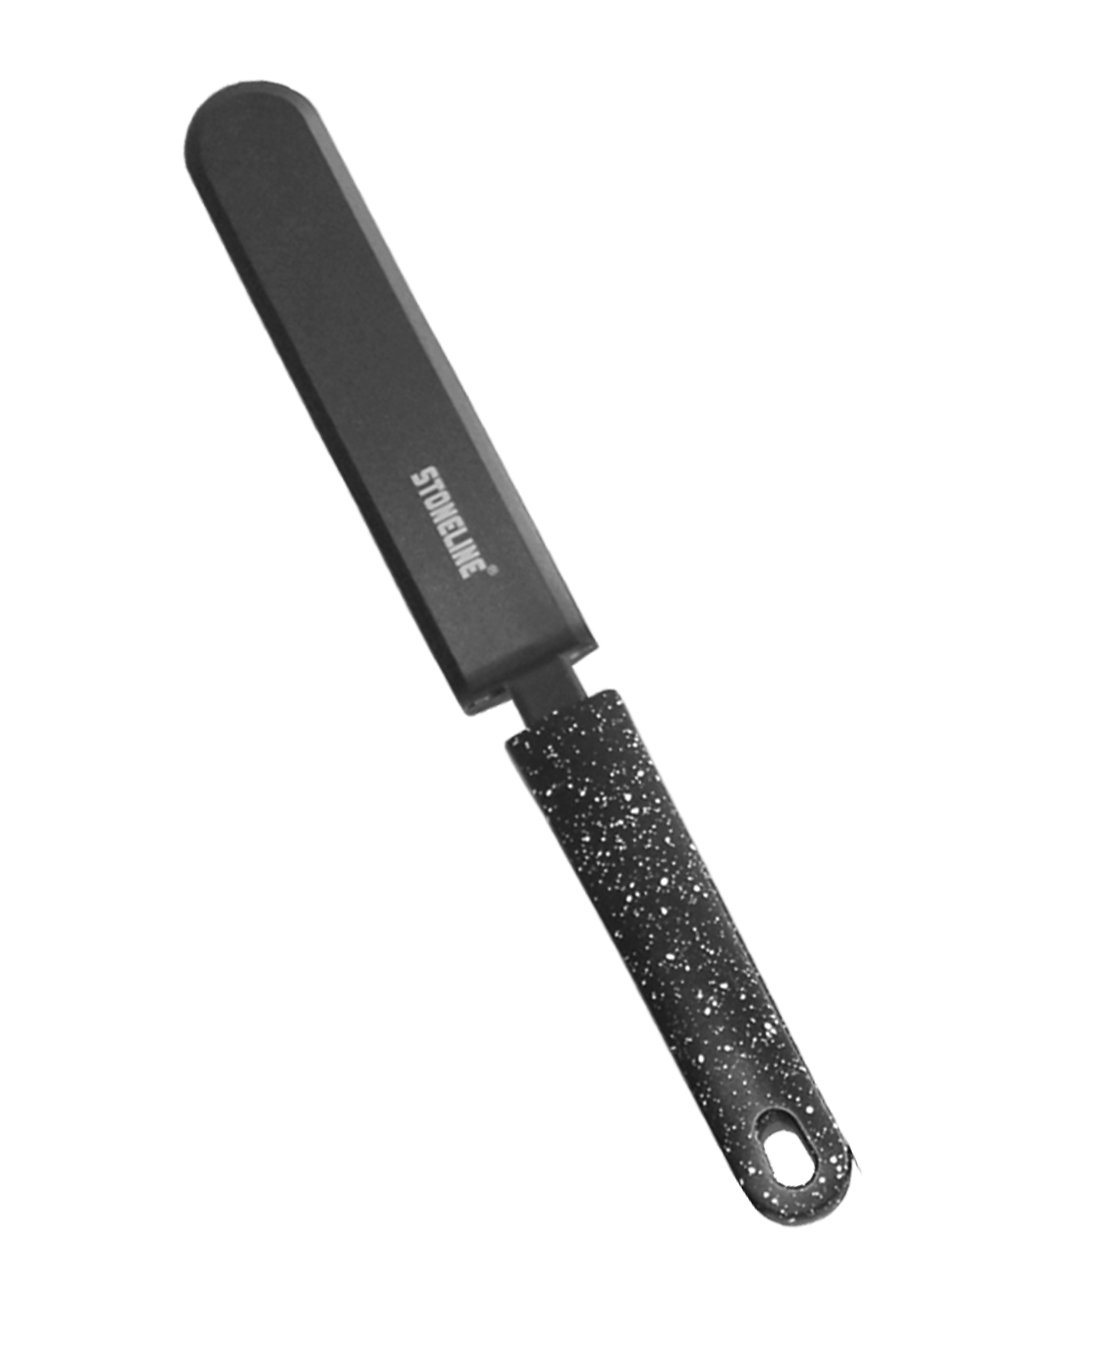 STONELINE® Spatula with support, plastic